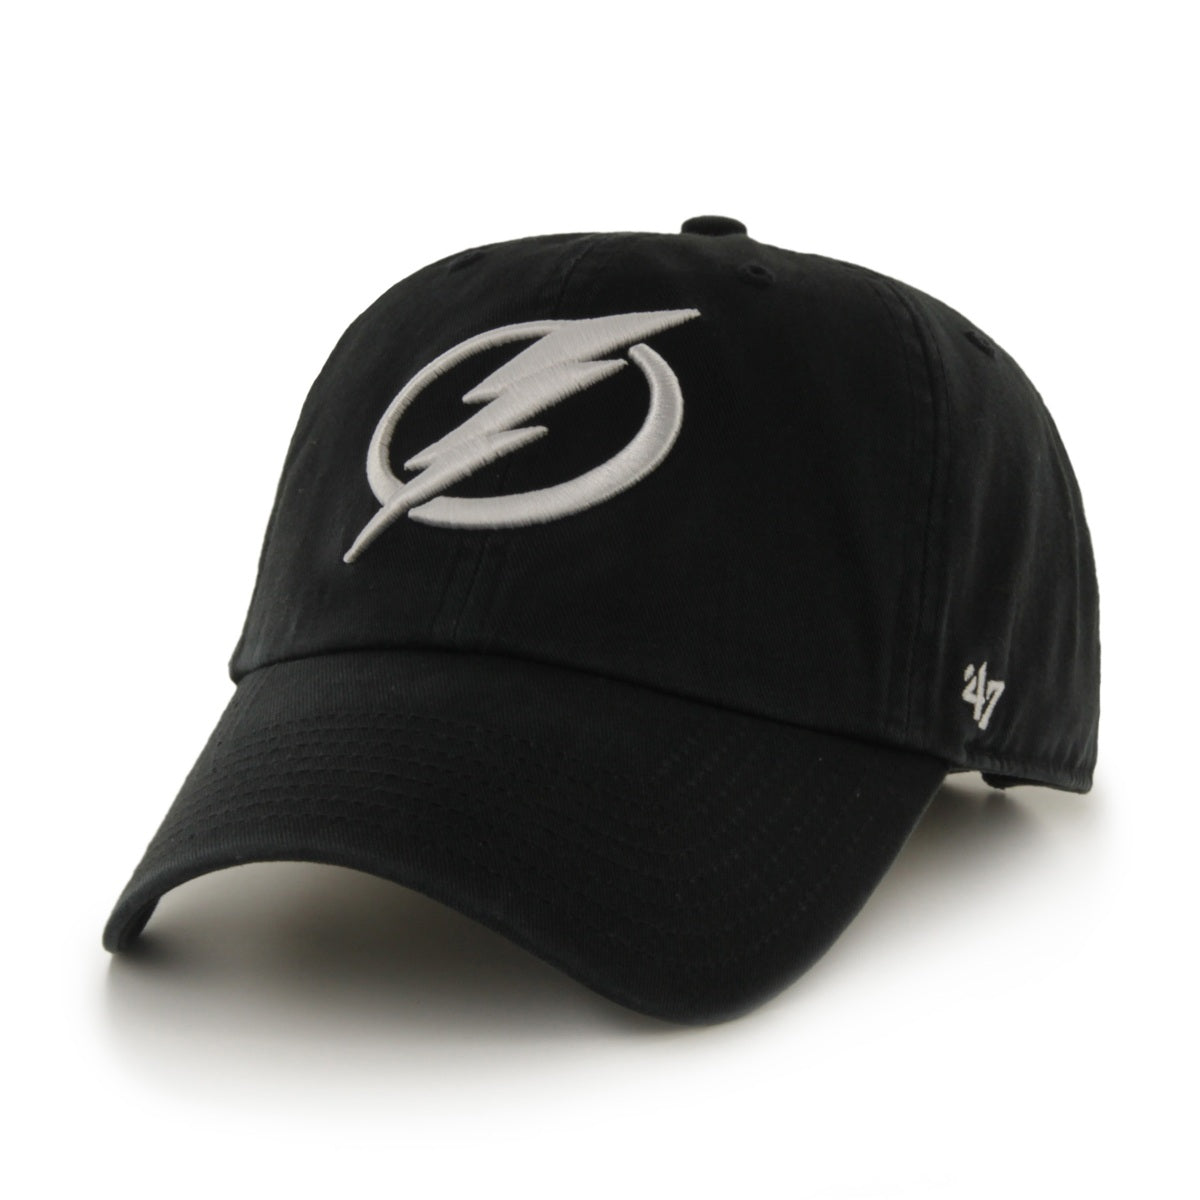 Tampa Bay Lightning Hat - Adult One Size Fits All - '47 Brand